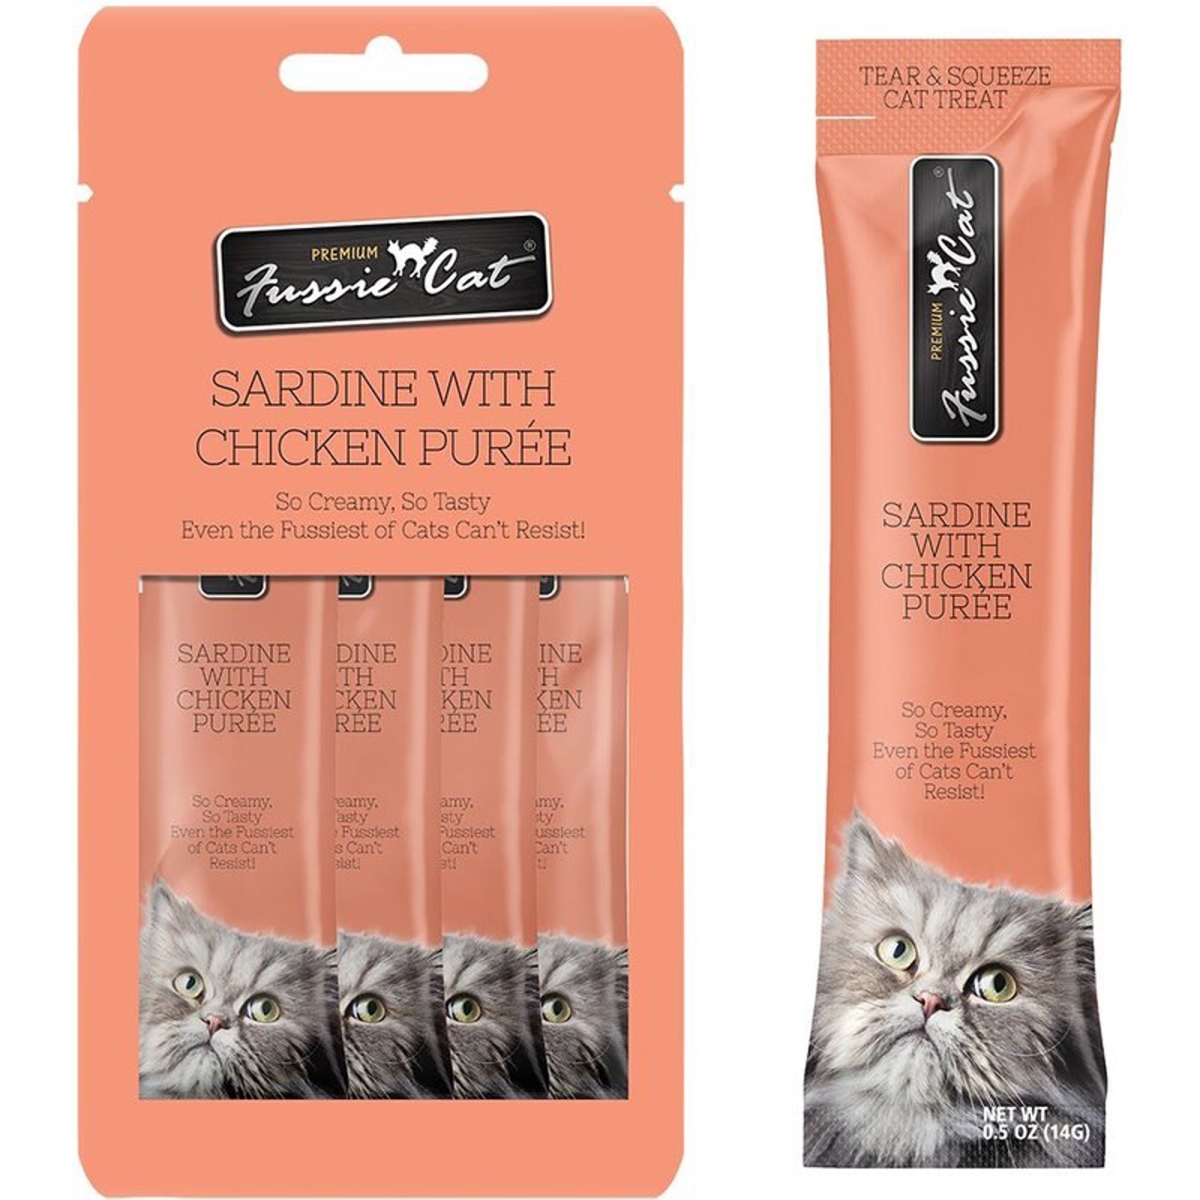 Picture of Fussie Cat 888641139323 2 oz Sardine Cat Treat with Chicken Puree - 18 Count